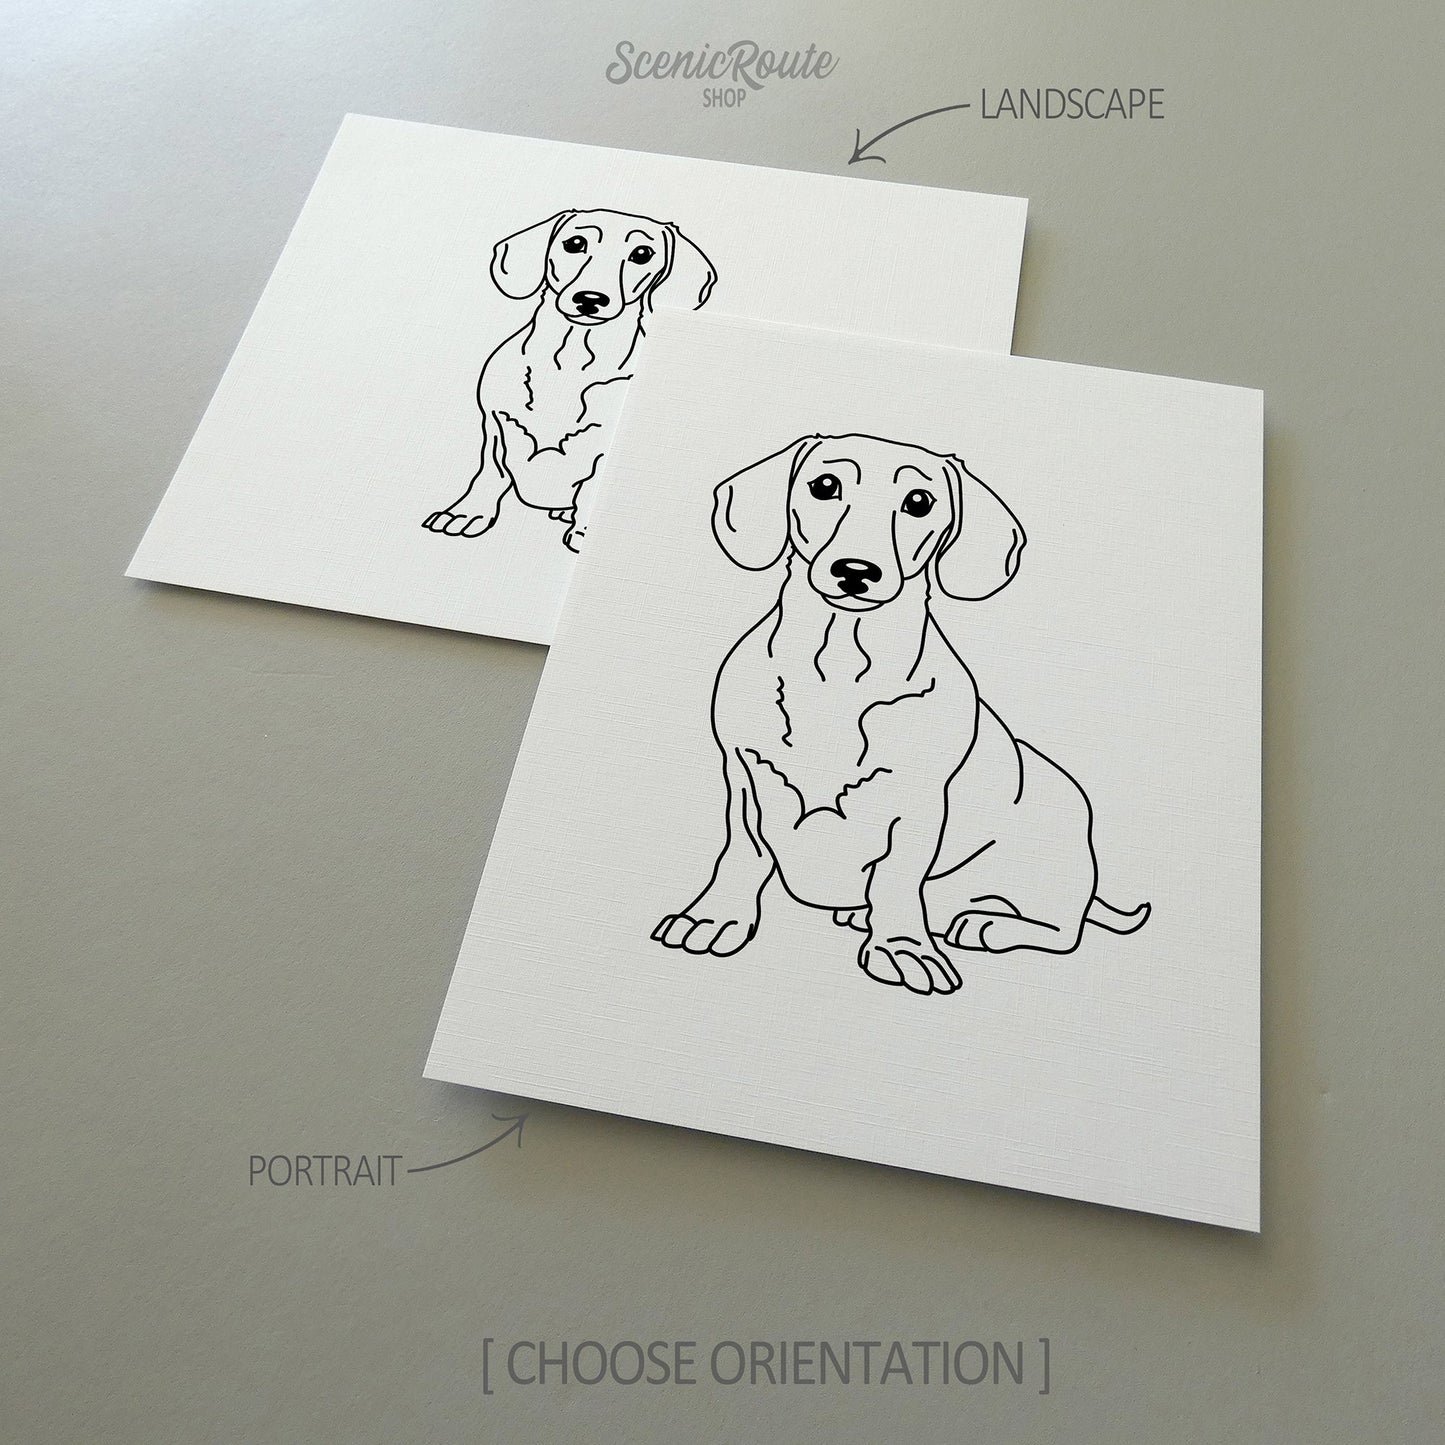 Two drawings of a Dachshund dog on white linen paper with a gray background.  Pieces are shown in portrait and landscape orientation options to illustrate the available art print options.